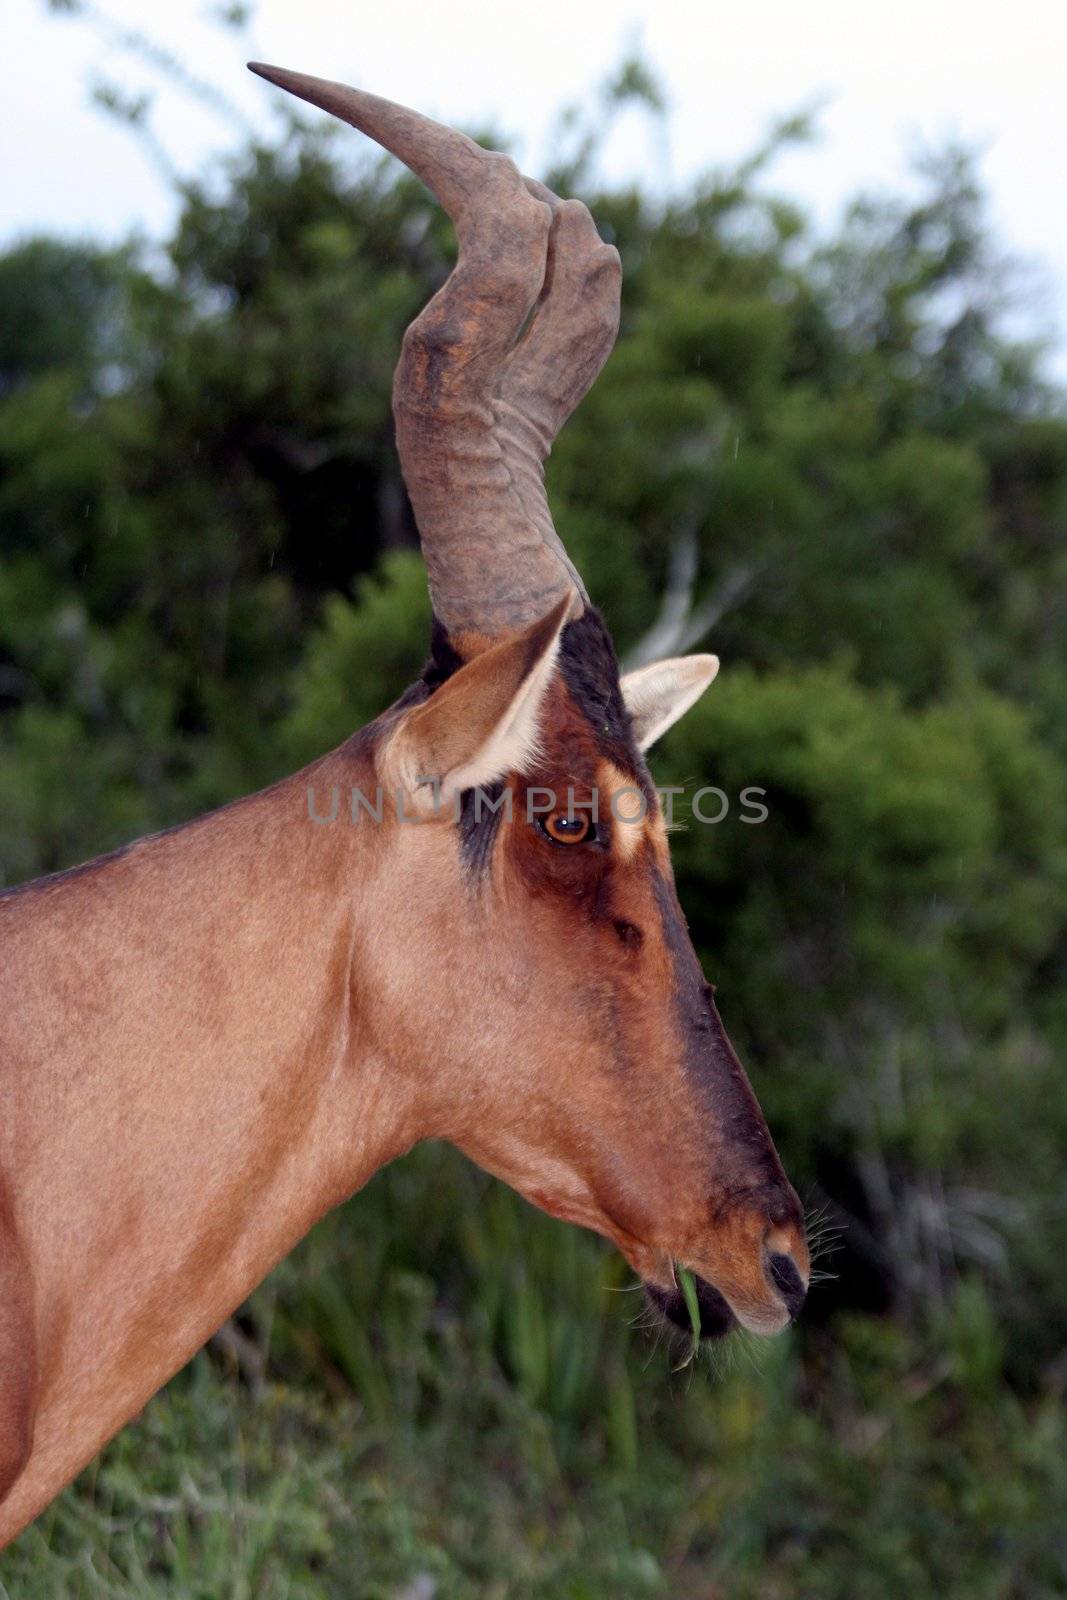 Profile of a handsome Red Hartebeest Antelope